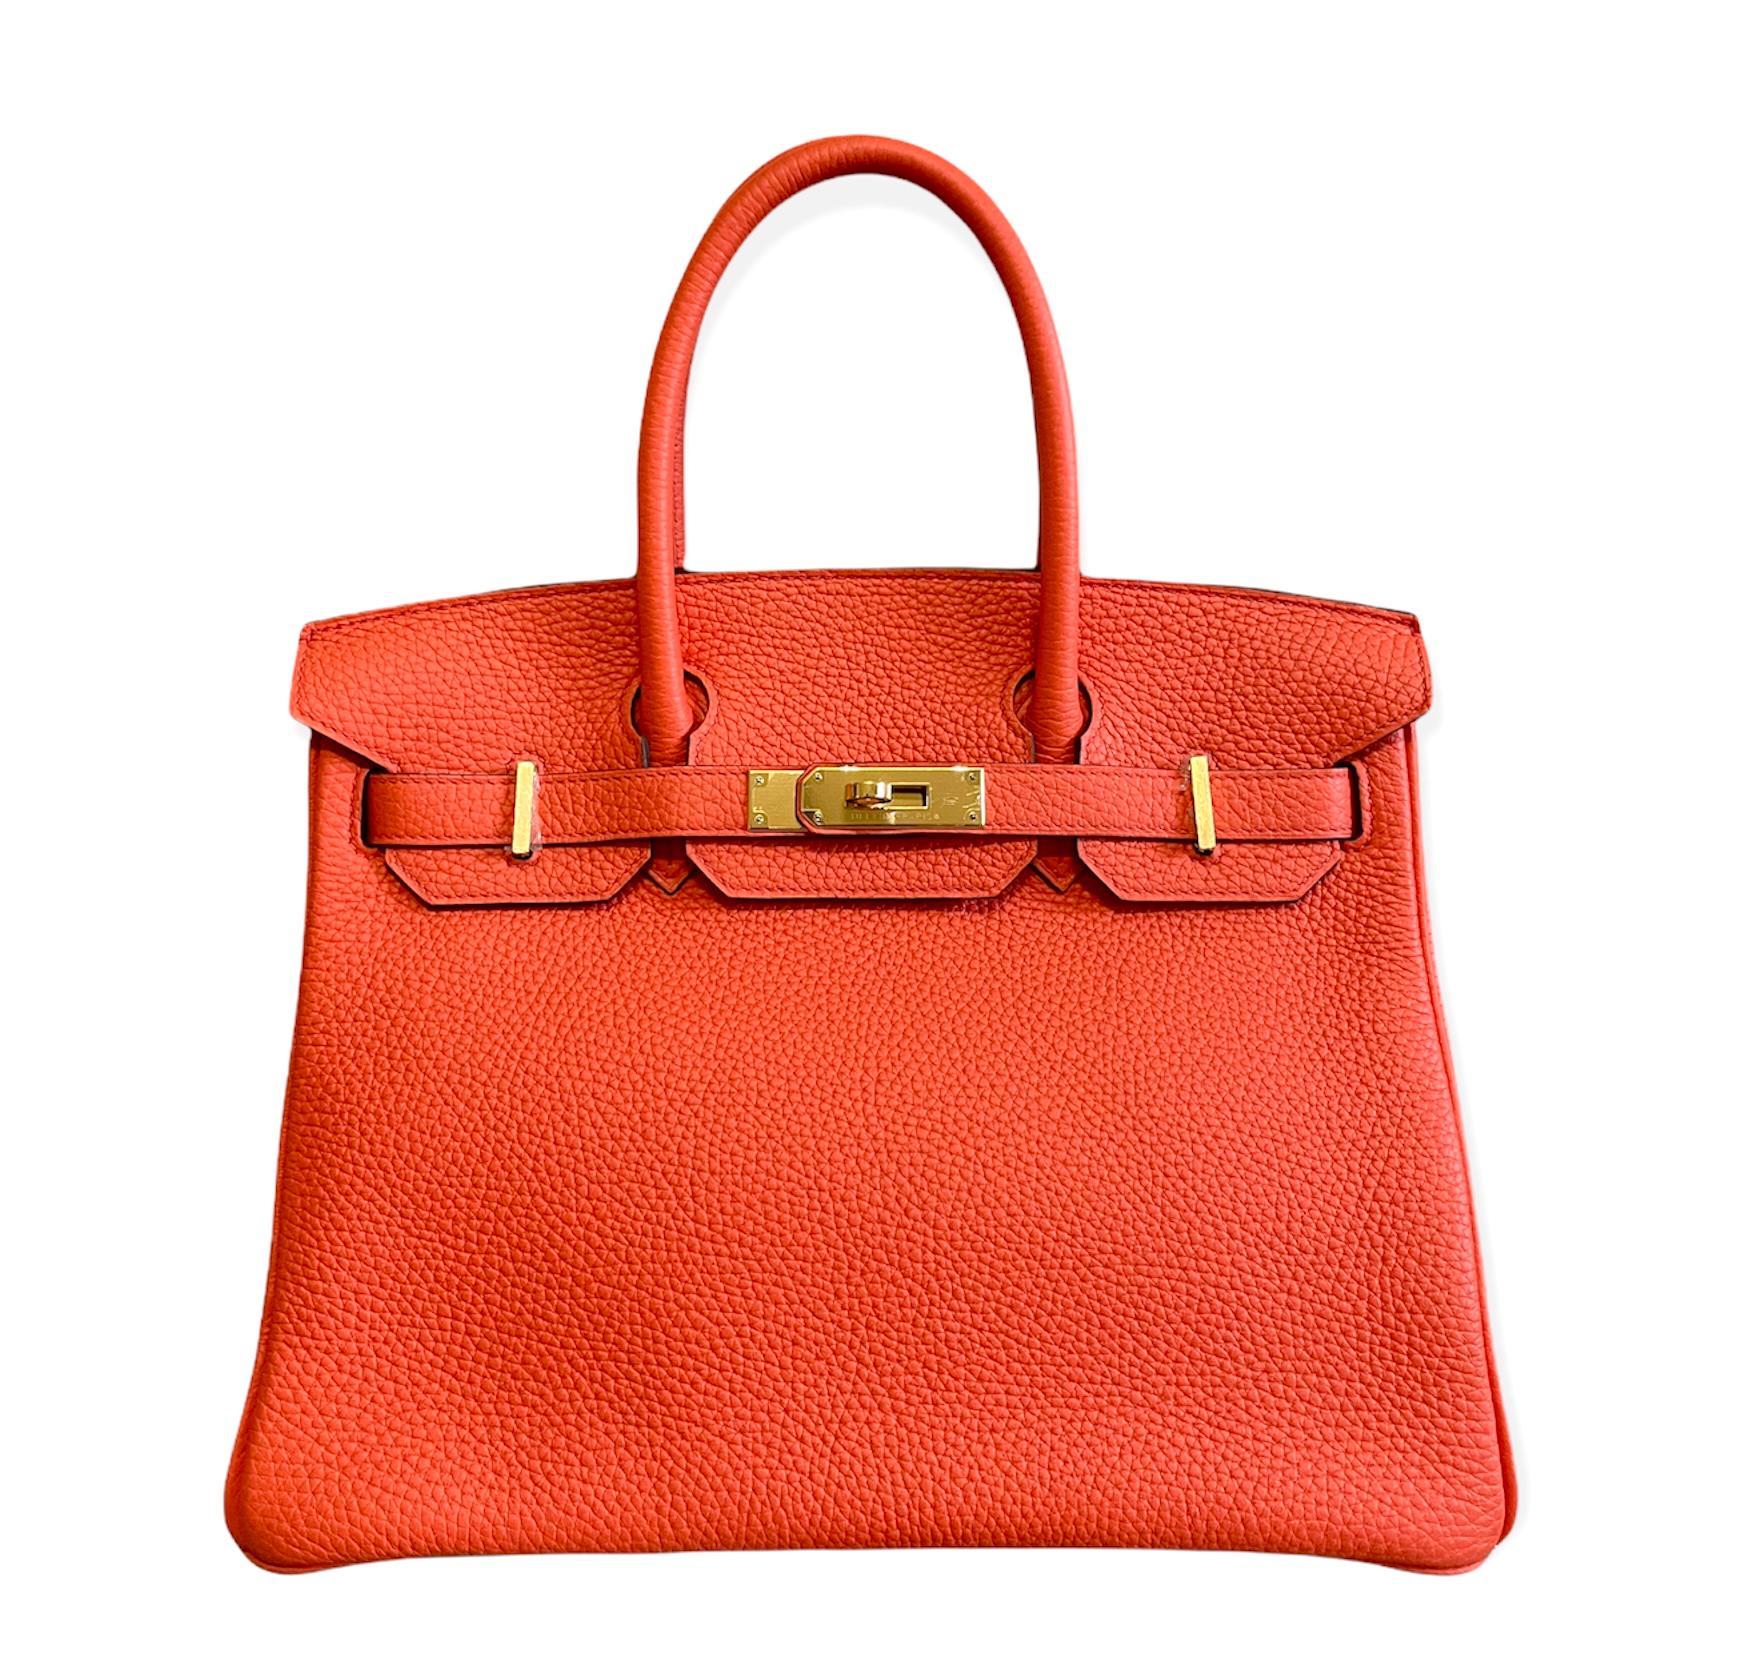 Stunning Hermes Birkin 30 Poppy Orange complimented with Gold Hardware. T Stamp 2015, Almost Like New Condition with Plastic on Hardware. 
Shop with confidence from Lux Addicts. Authenticity Guaranteed!